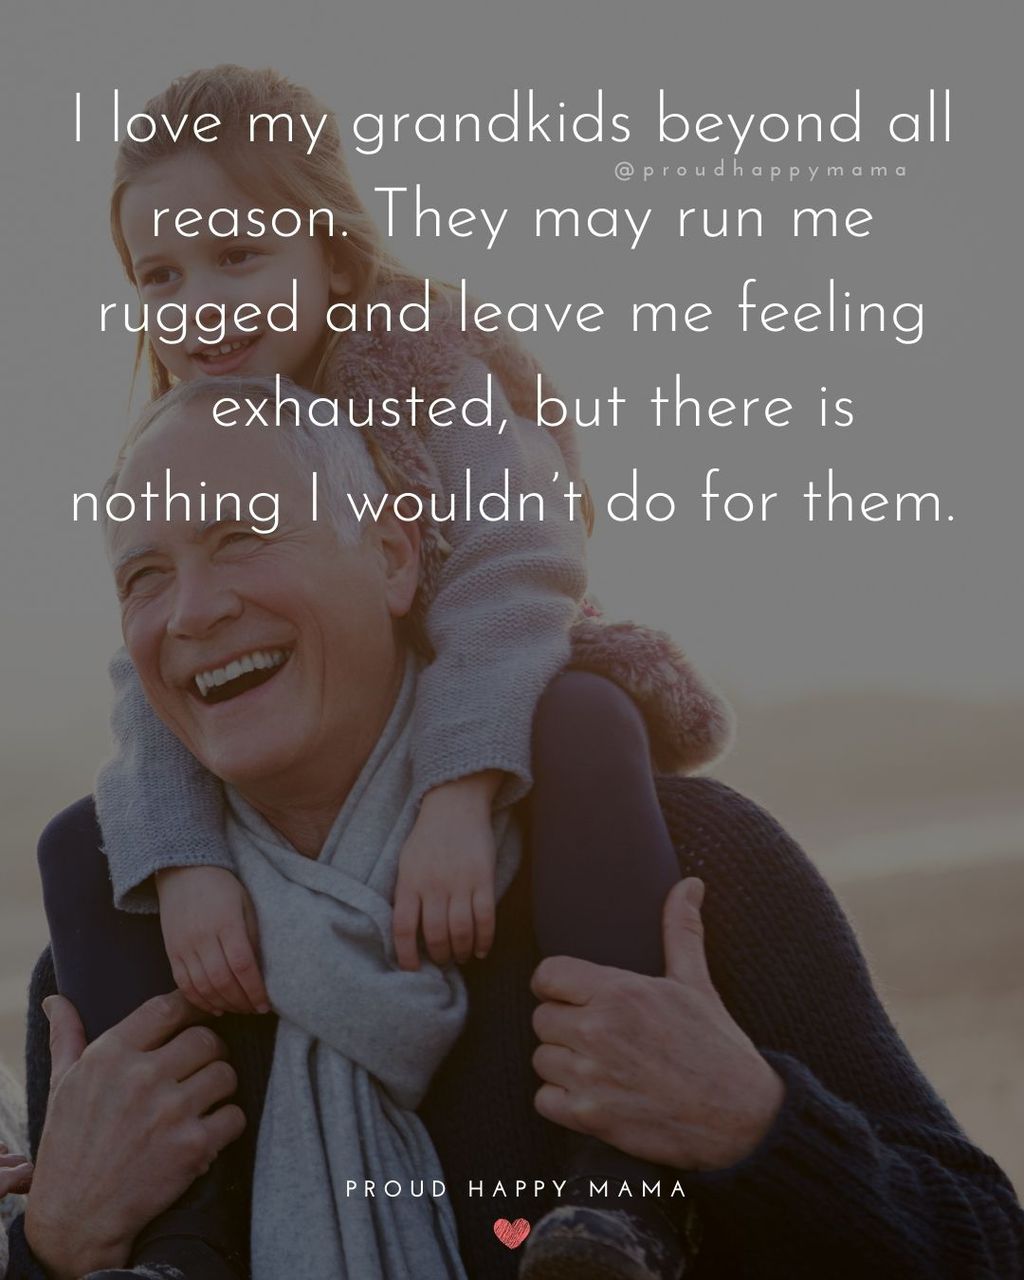 Quotes for Grandchildren - I love my grandkids beyond all reason. They may run me rugged and leave me feeling exhausted, but there is nothing I wouldn’t do for them.